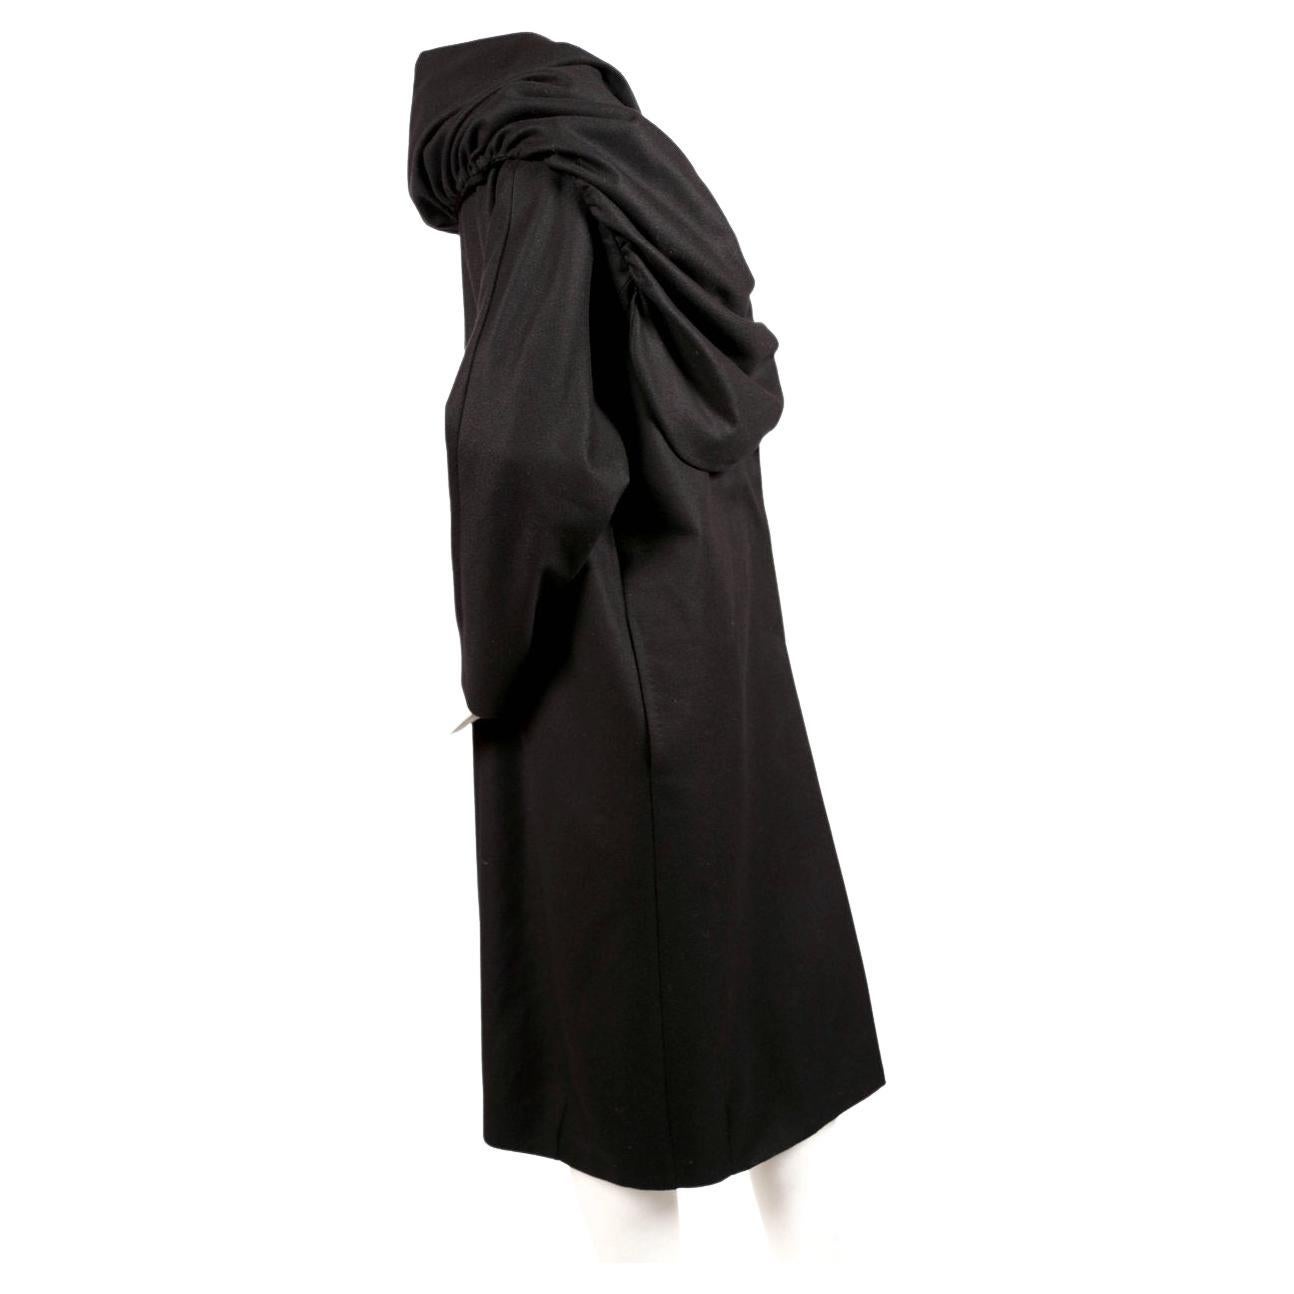 Jet-black, wool opera coat with dramatic ruched shawl collar designed by Dries Van Noten dating to the early 1990's. Labeled a size 'XS' however this can easily also fit a small or possibly a medium due to the generous cut. Approximate measurements: